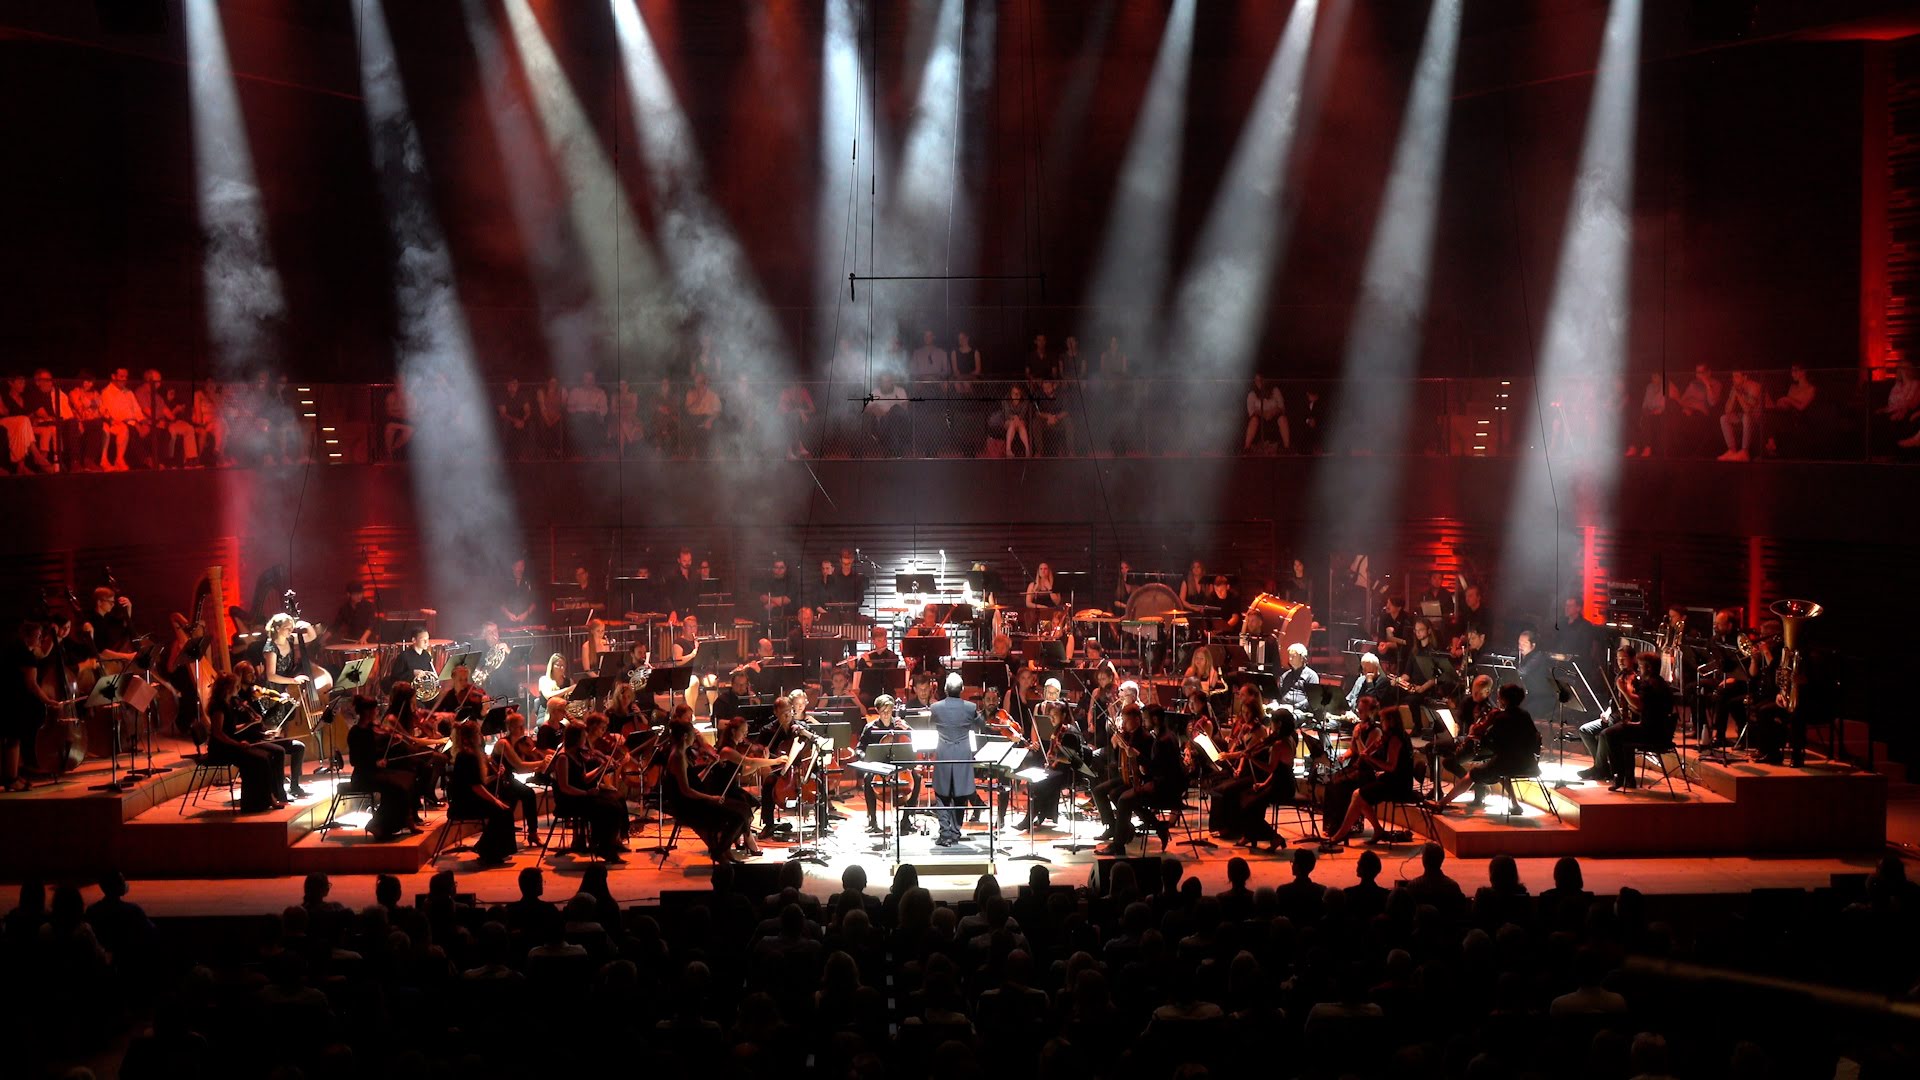 A stage in the tail light with orchestra and conductor.